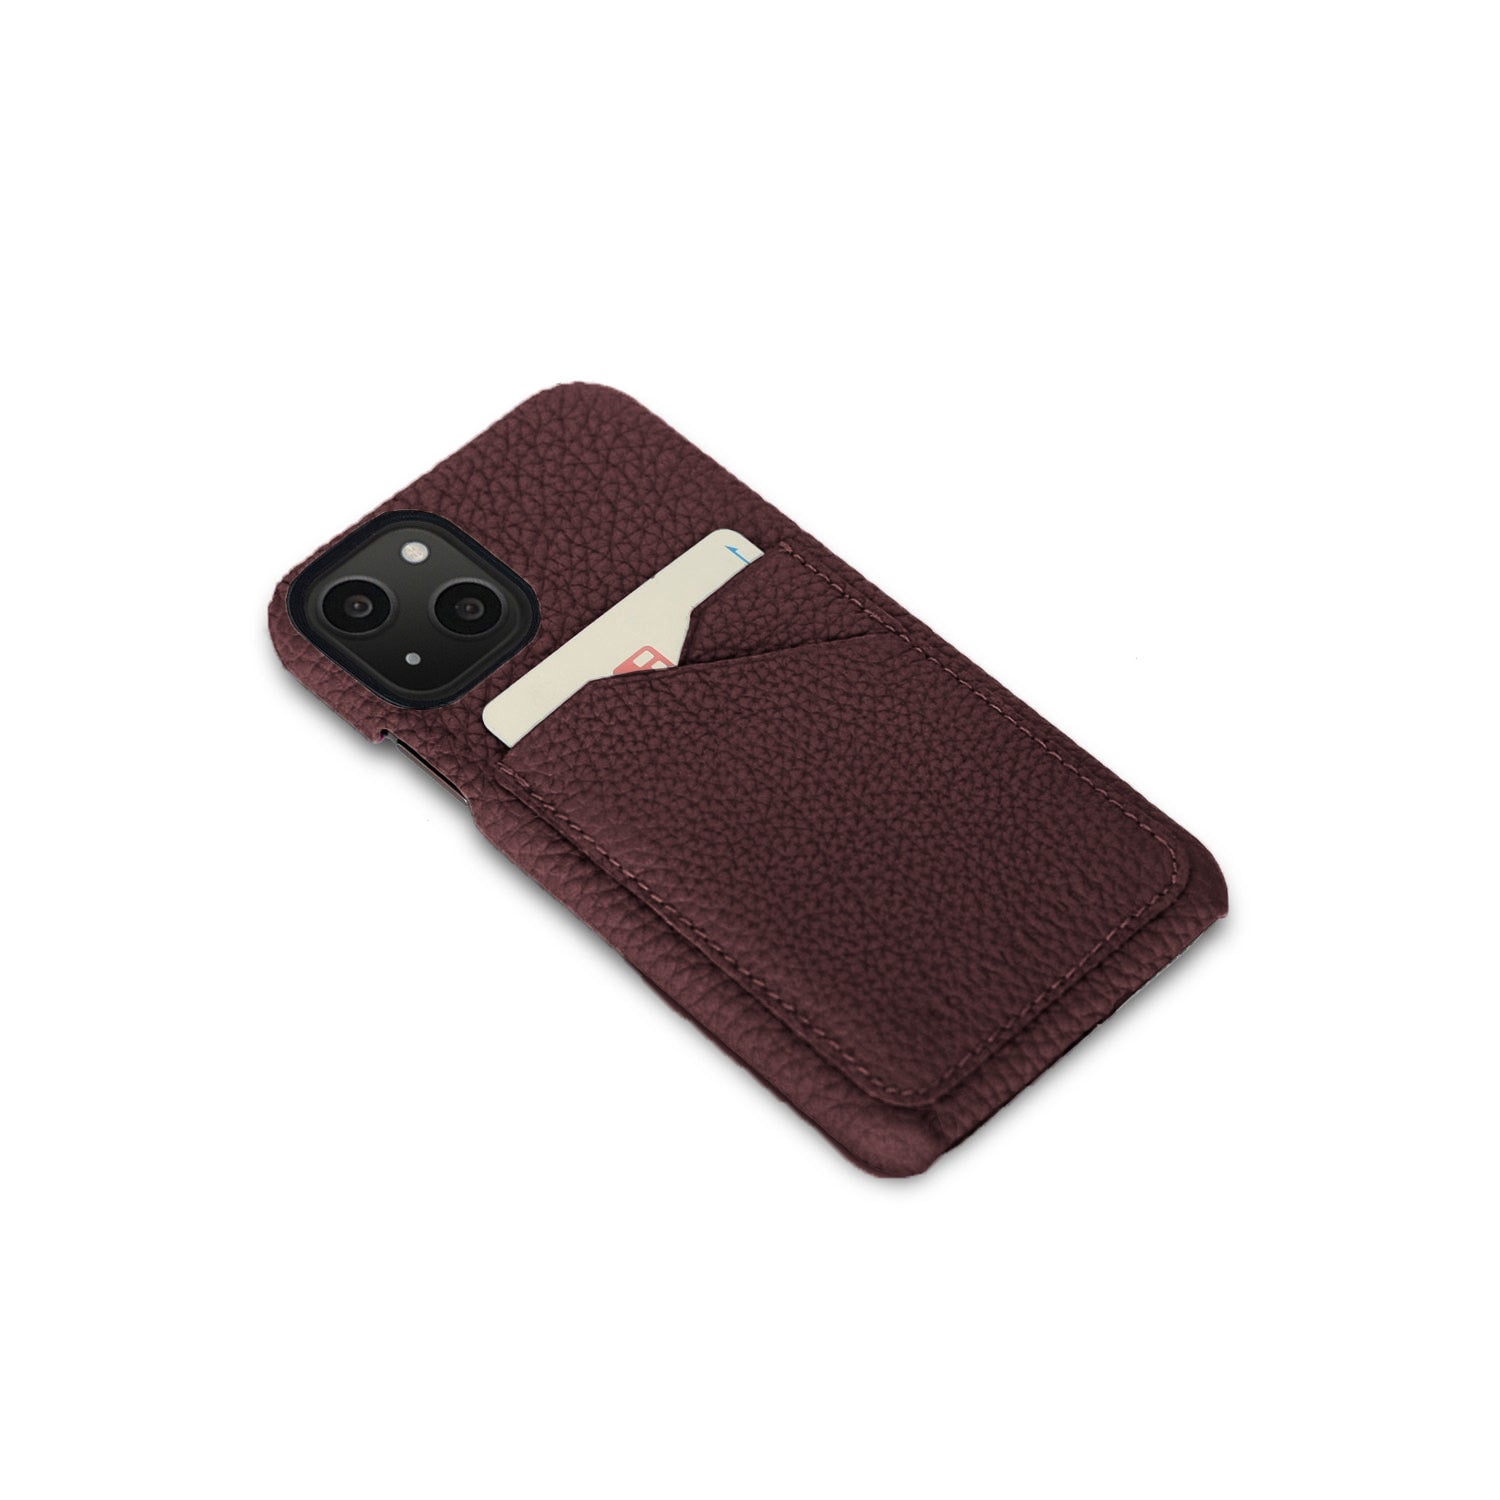 (iPhone 13 mini) Back cover case Shrink leather